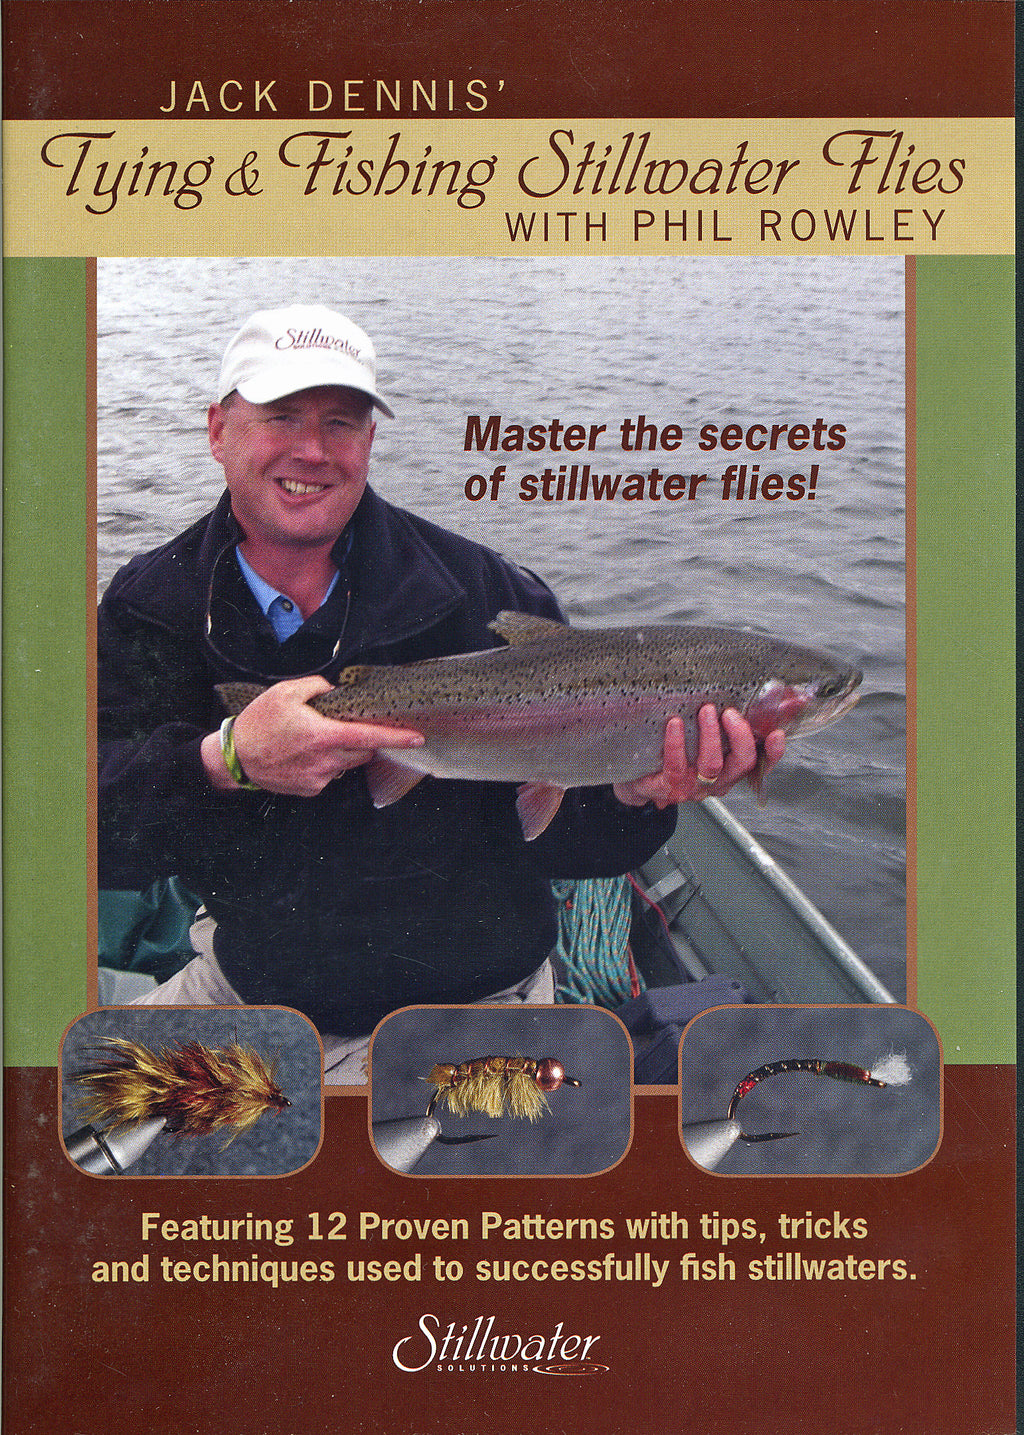 THE ORVIS GUIDE TO STILLWATER TROUT FISHING – Phil Rowley & Brian